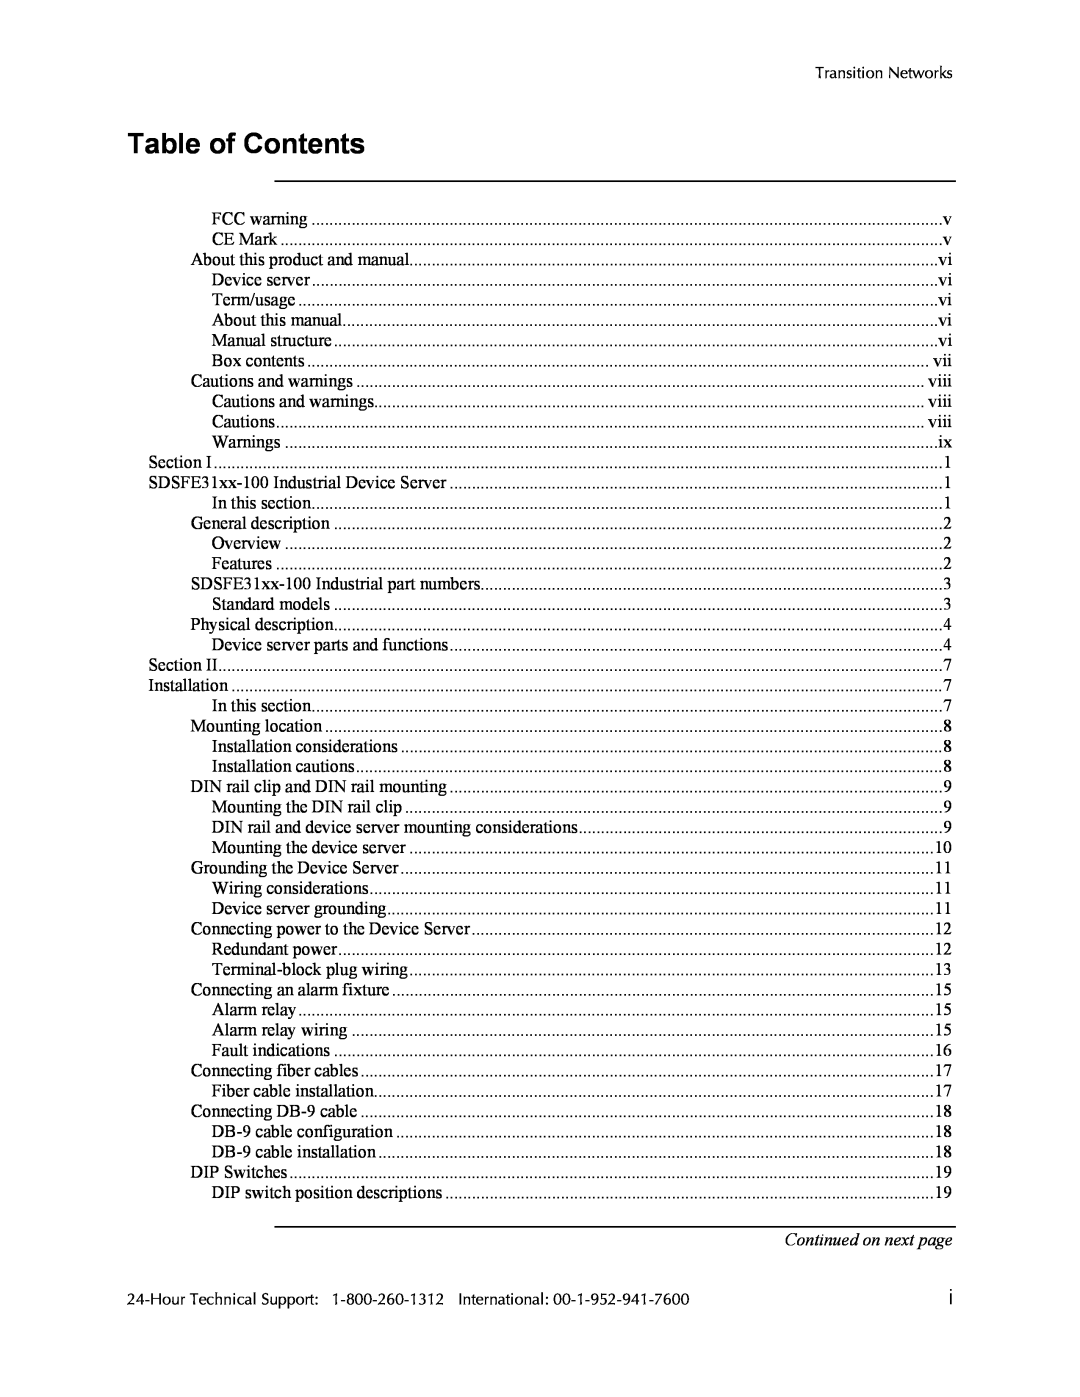 Transition Networks SDSFE31XX-100, RS-232-TO-100BASE-FX manual Table of Contents, Transition Networks 